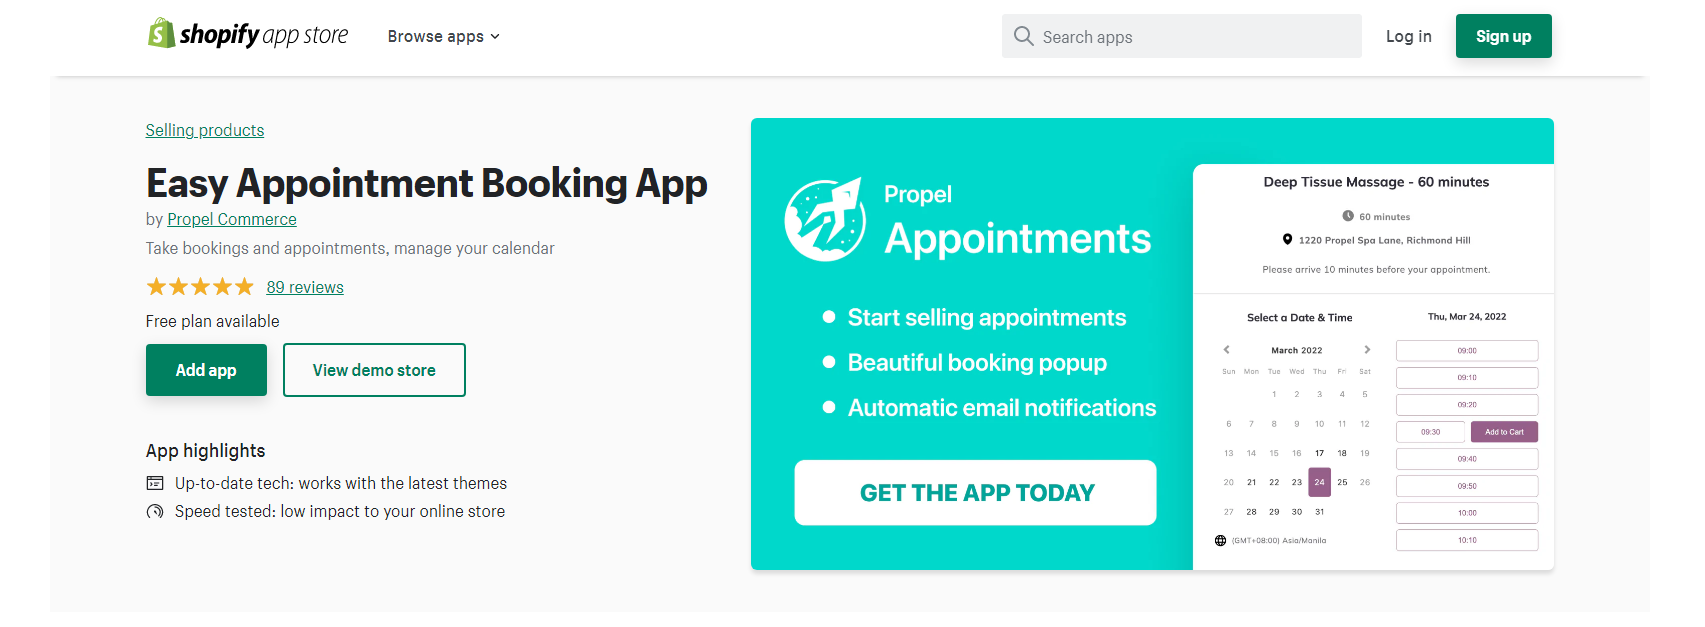 Easy Appointment Booking App - Shopify booking system